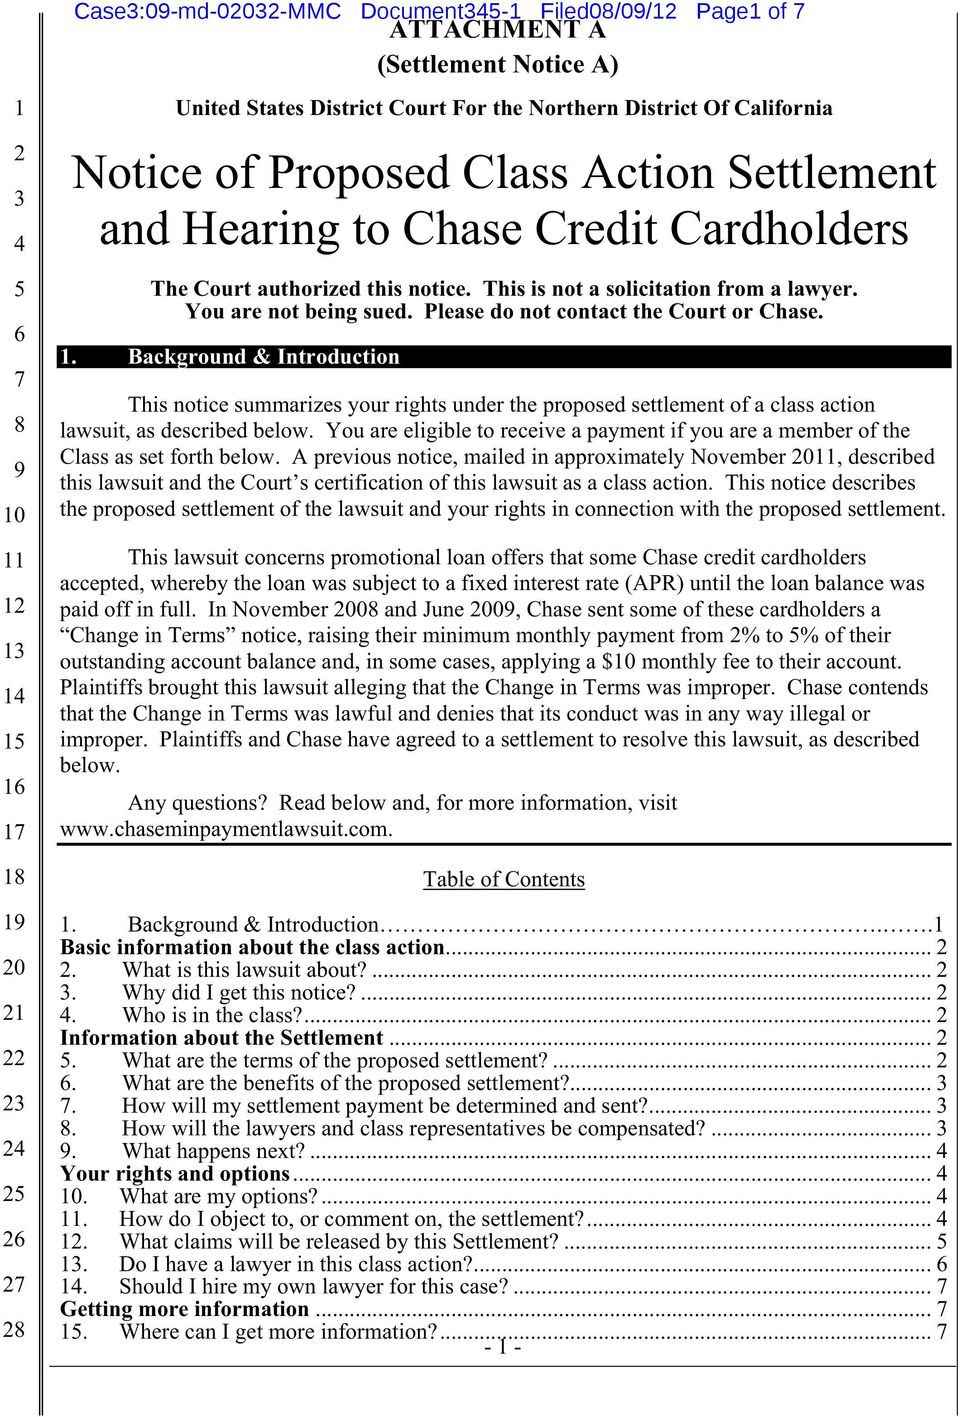 Background & Introduction This notice summarizes your rights under the proposed settlement of a class action lawsuit, as described below.